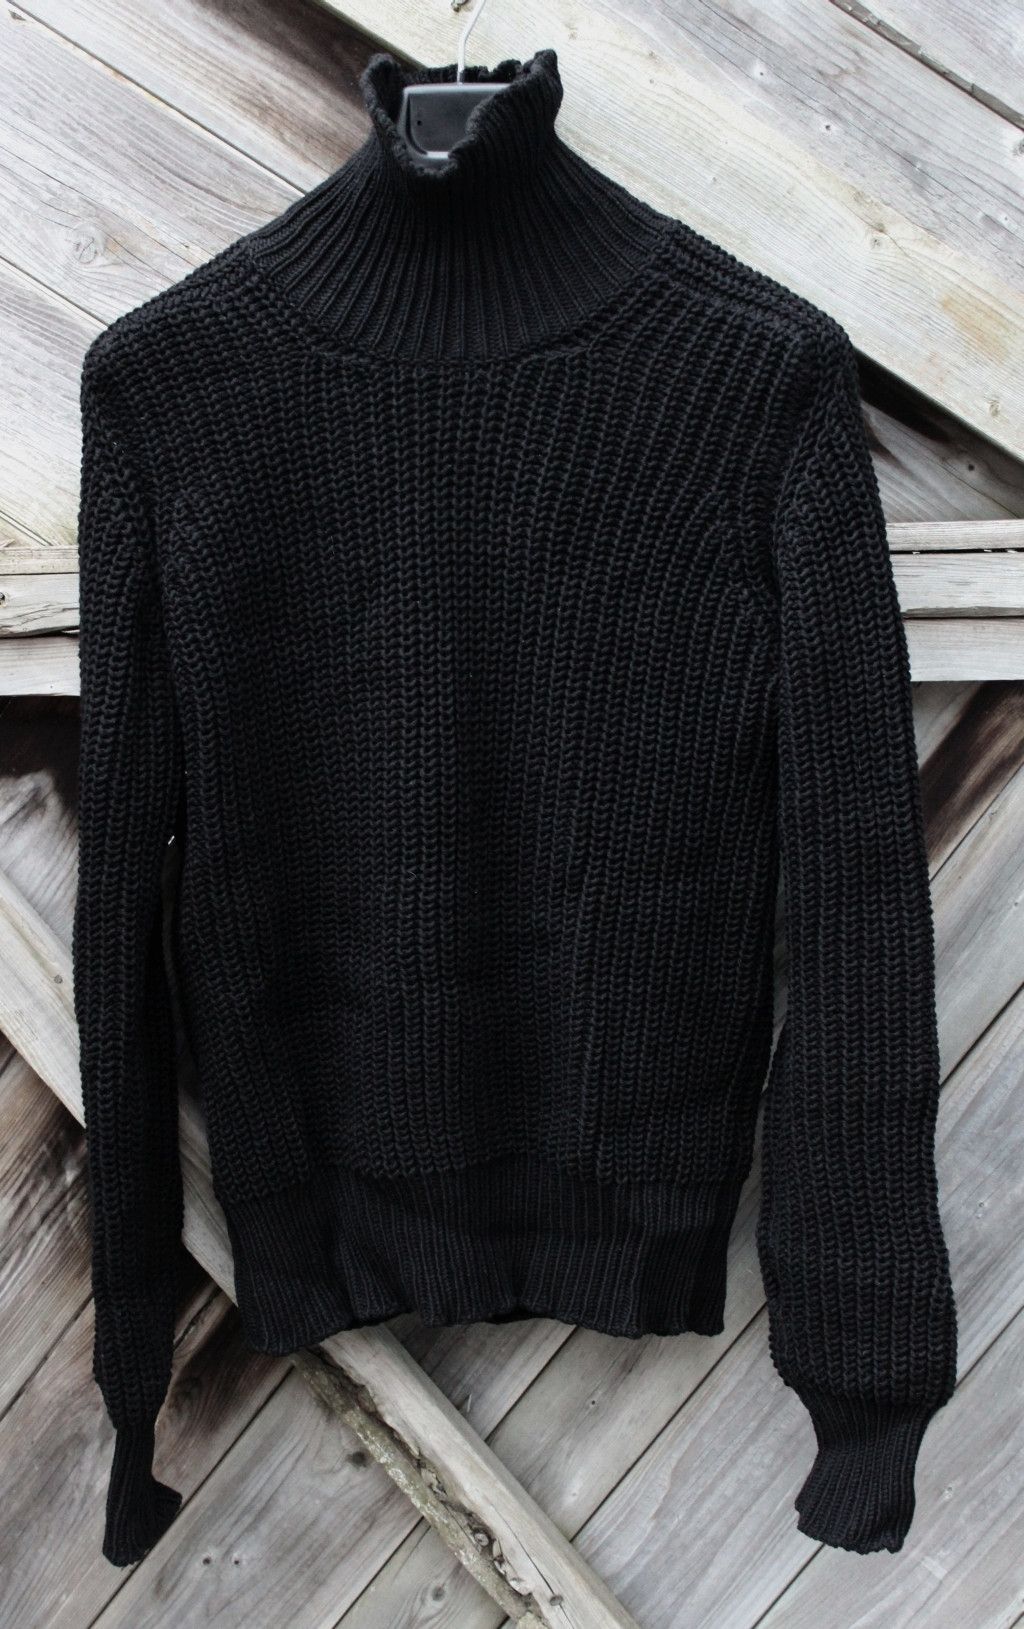 Rick Owens FW14 moody wool knit Size US M / EU 48-50 / 2 - 2 Preview